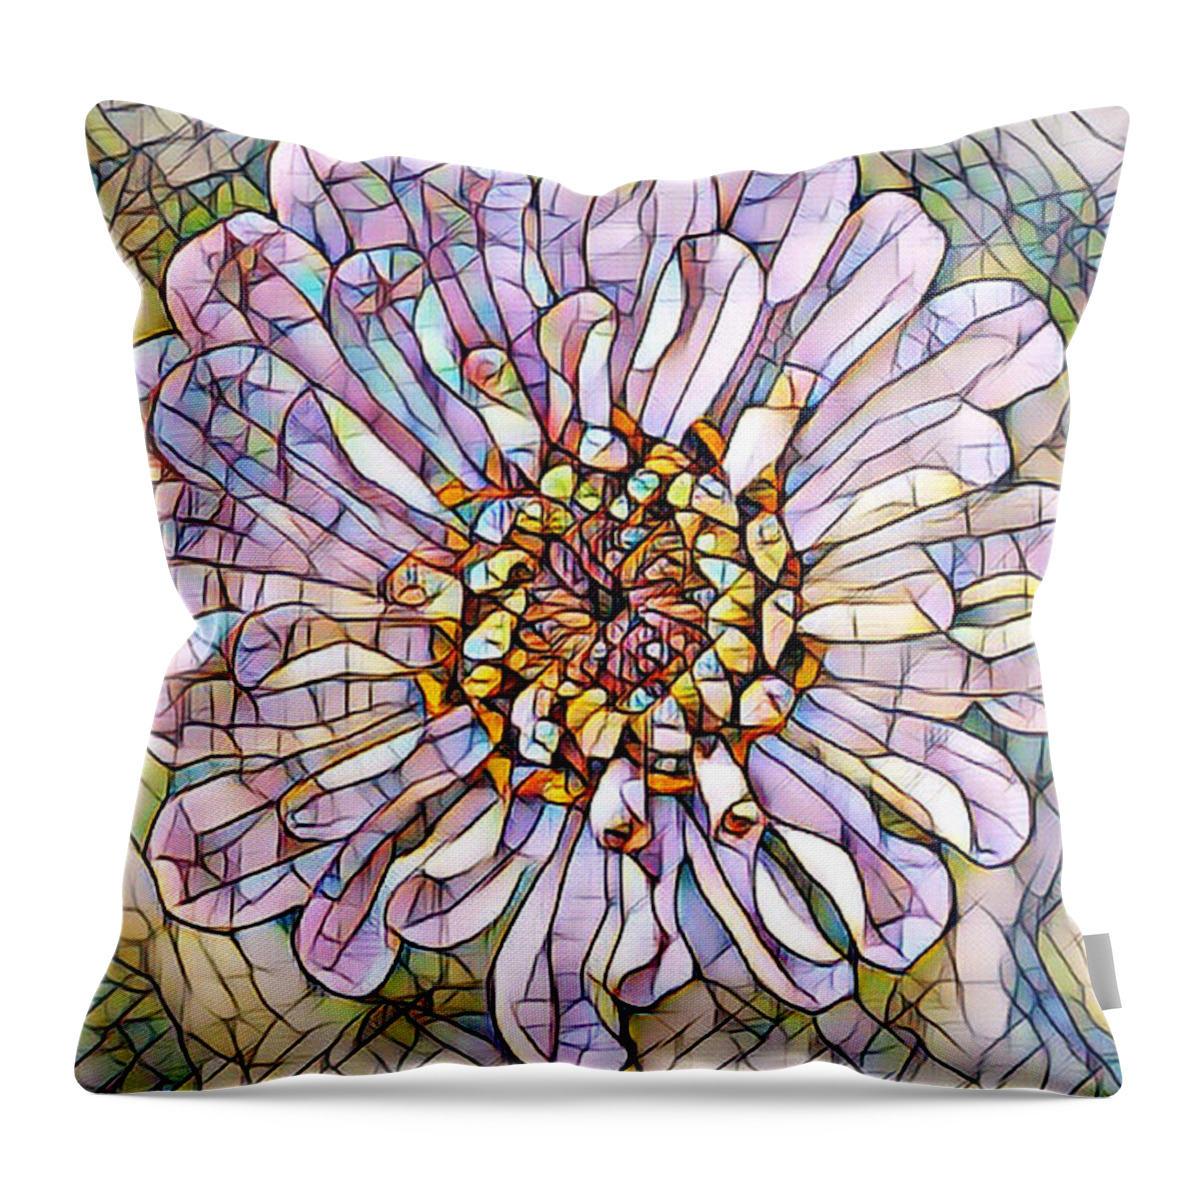 Fineartamerica Throw Pillow featuring the digital art Mosaic Portret flower by Yvonne Padmos